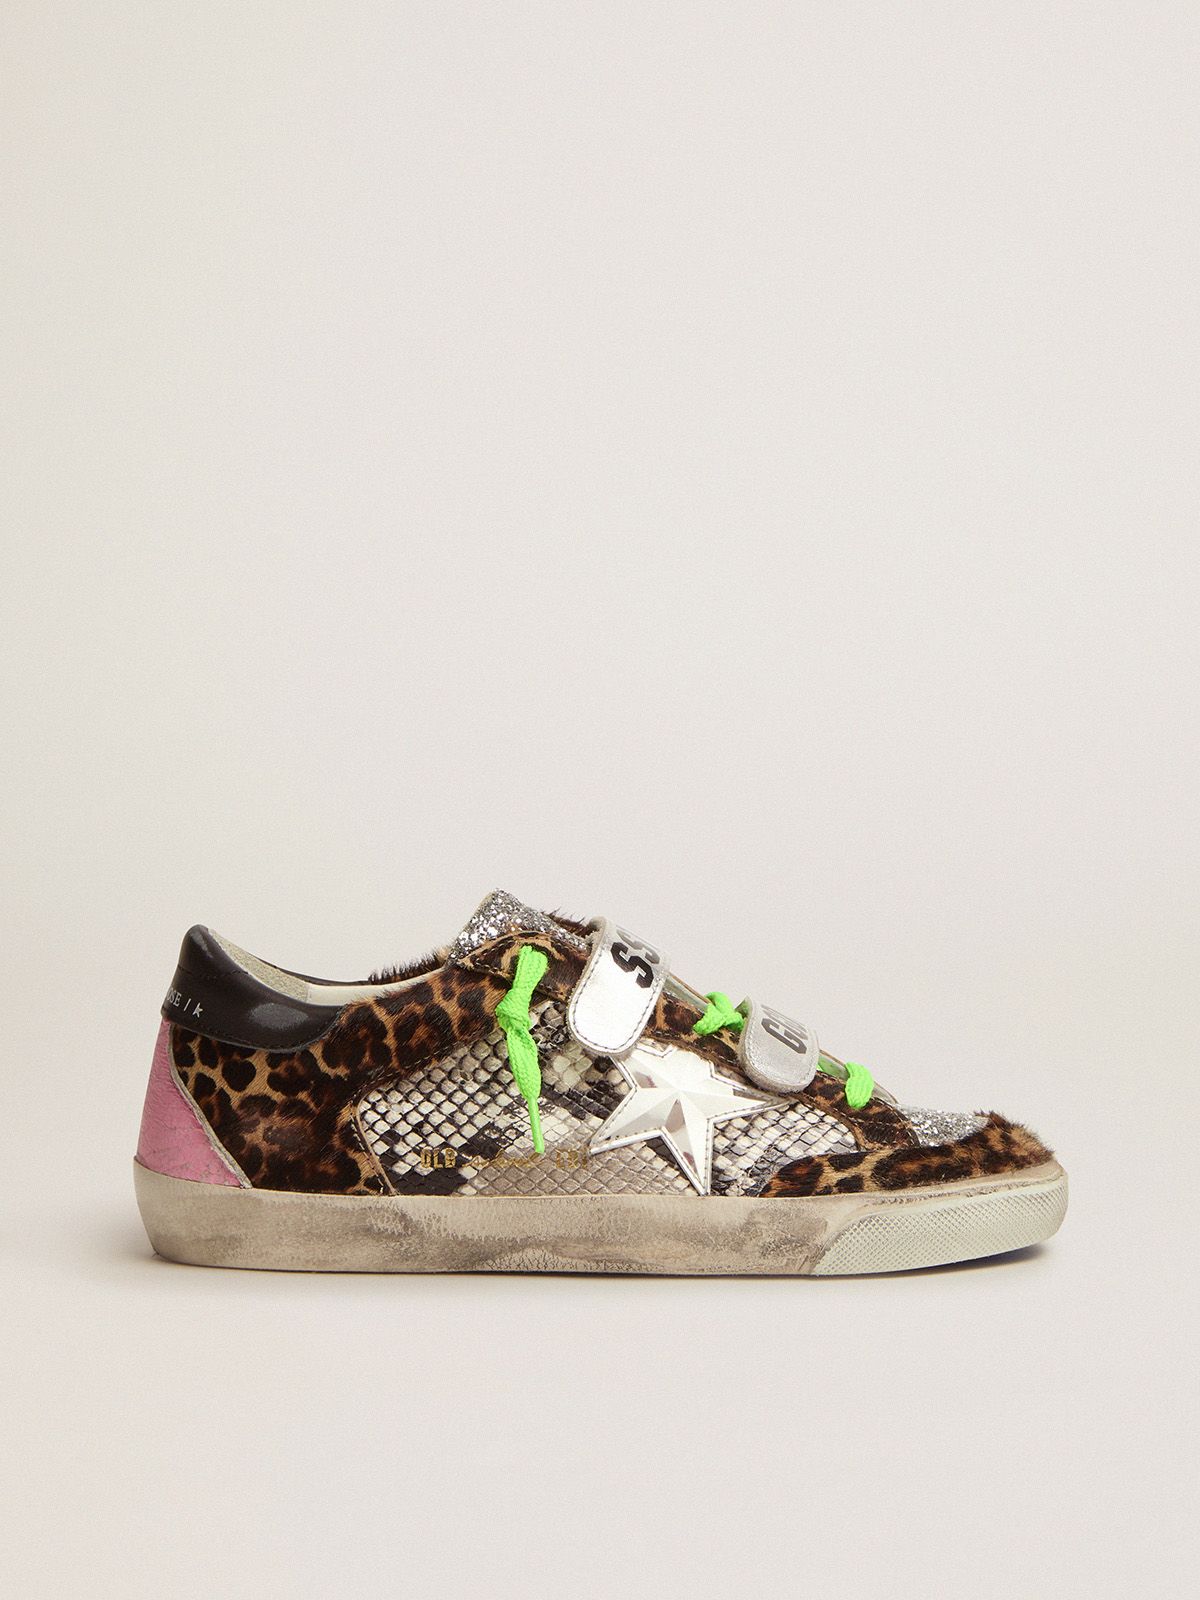 Sneakers Uomo Golden Goose Old School sneakers with leopard-print pony skin and snake-print leather upper